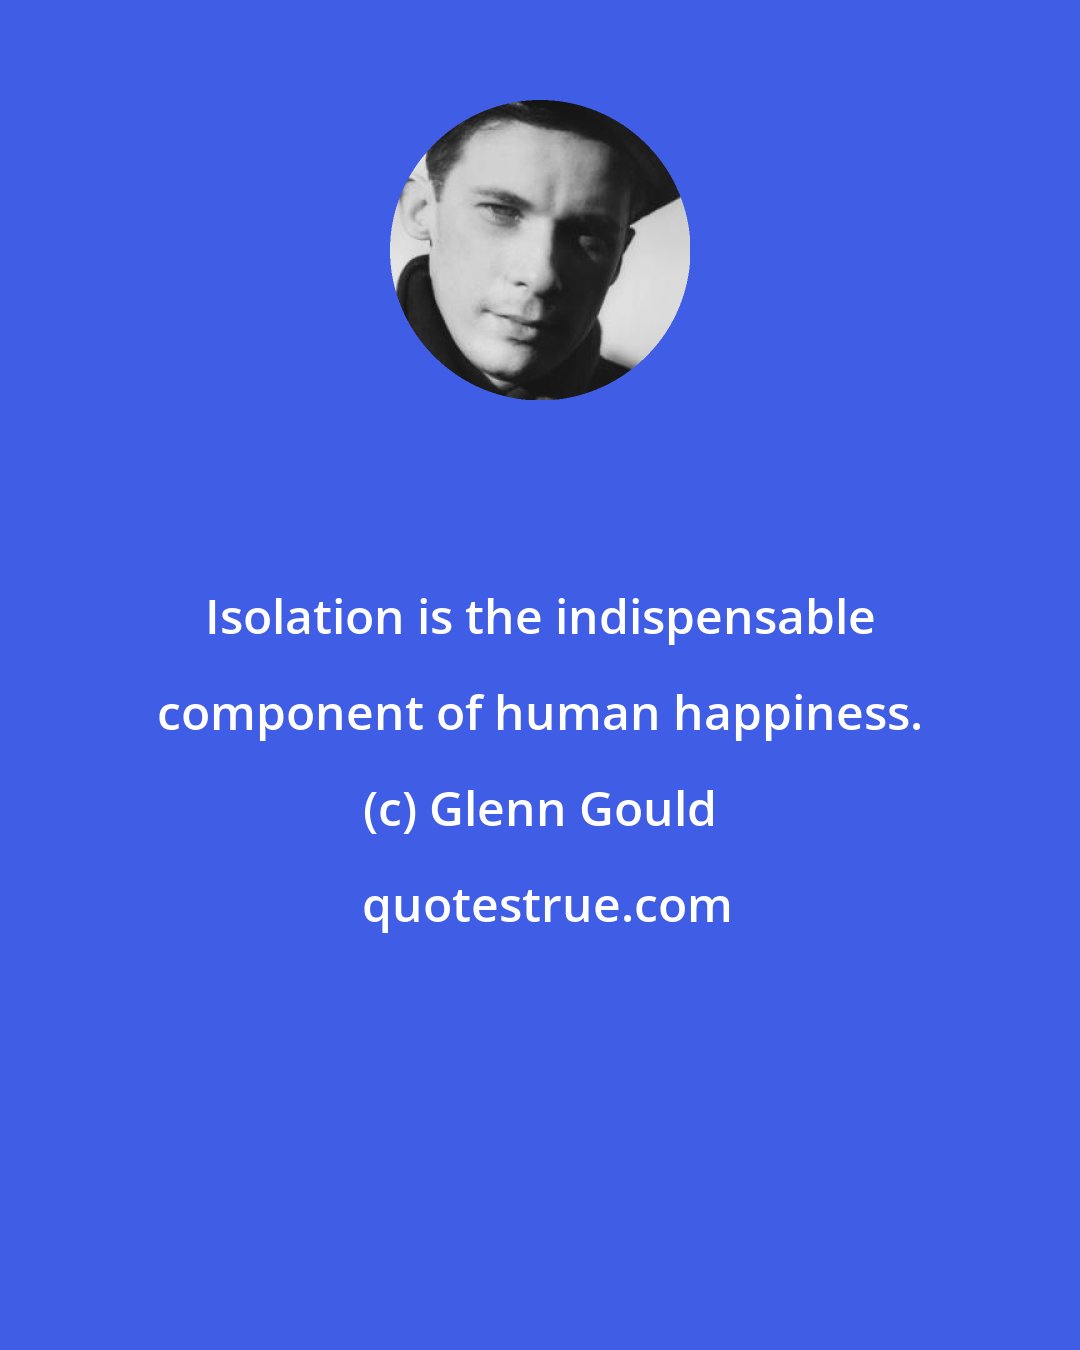 Glenn Gould: Isolation is the indispensable component of human happiness.